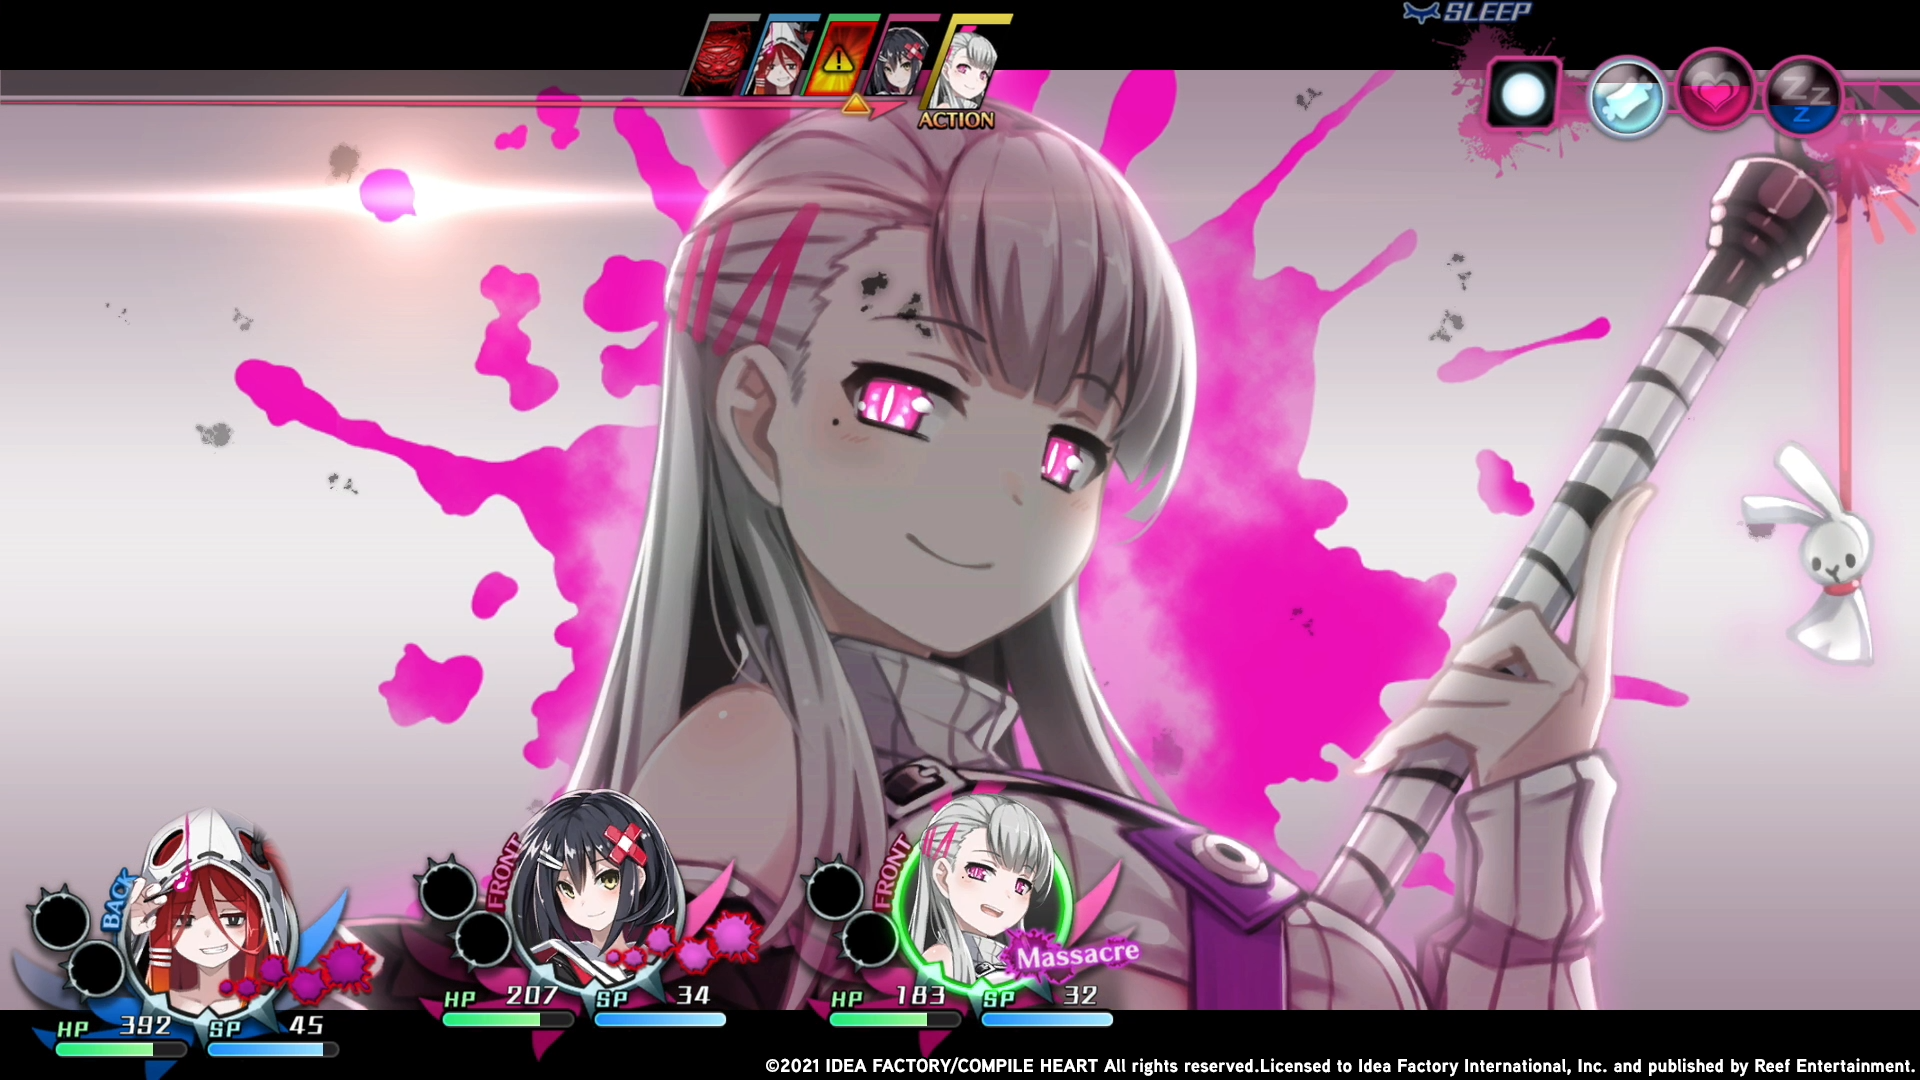 Mary Skelter™ Finale - Nintendo Switch™ - Standard Edition